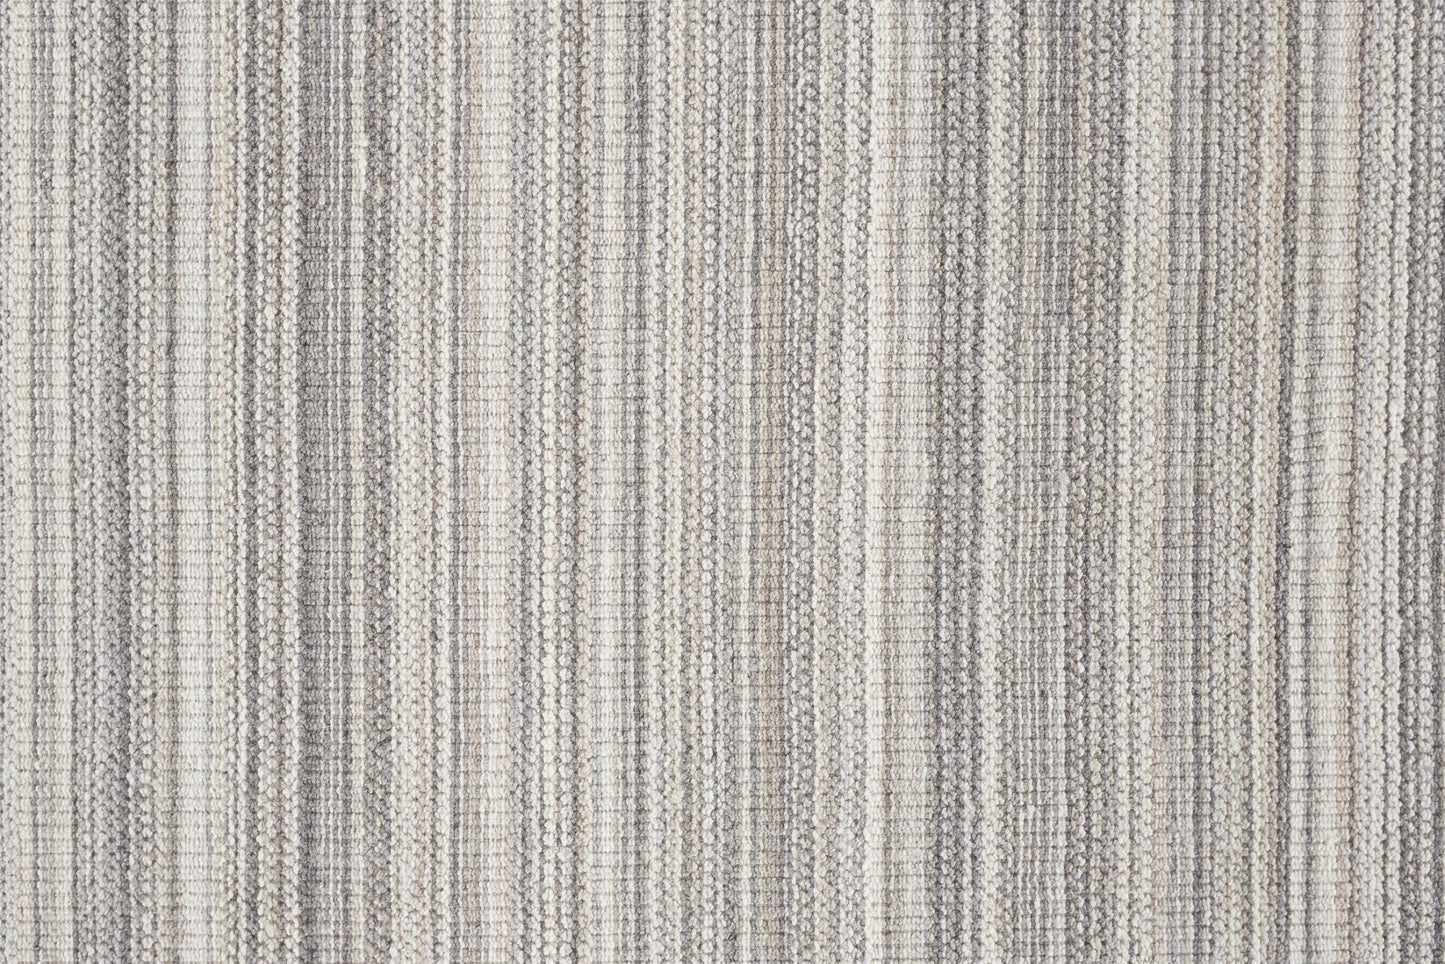 5' X 8' Ivory Wool Hand Woven Stain Resistant Area Rug